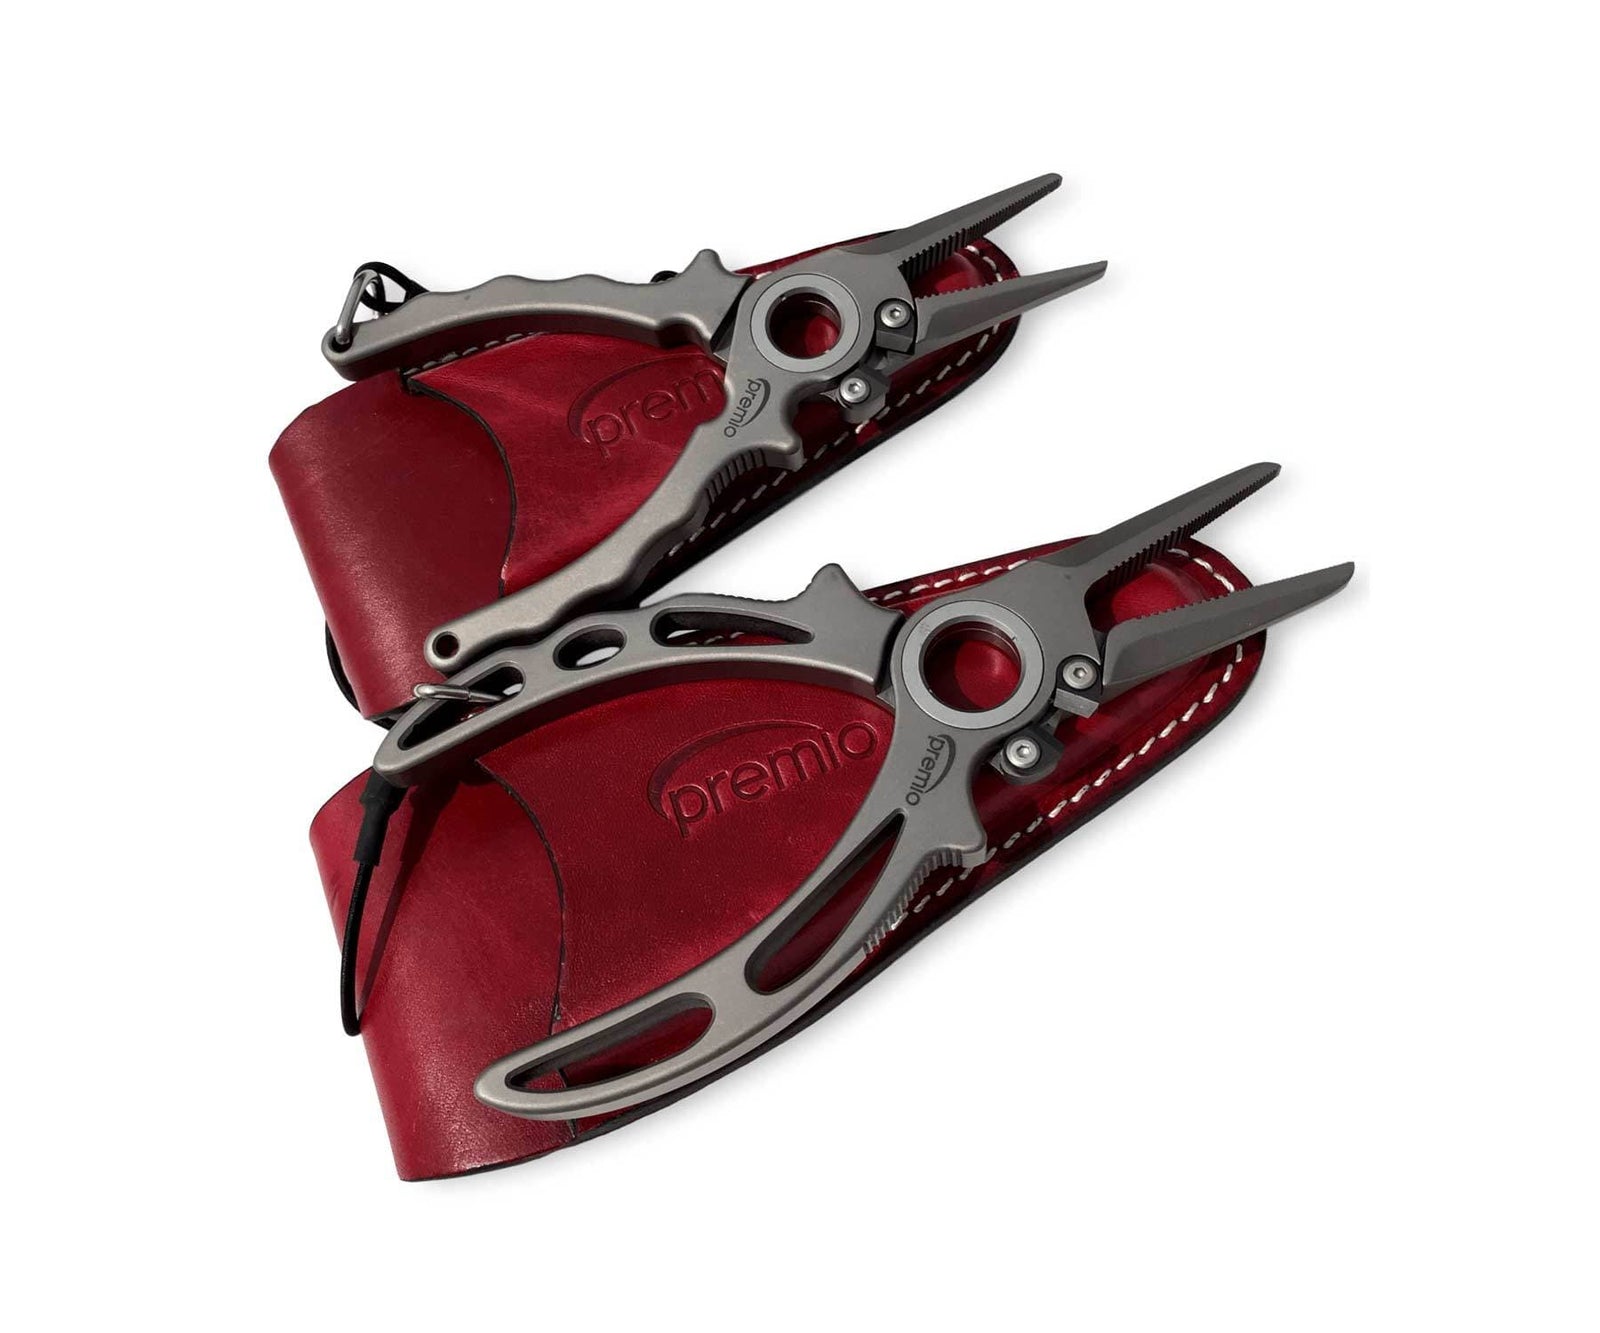 Danco Pliers Tagged fishing-pliers - The Saltwater Edge